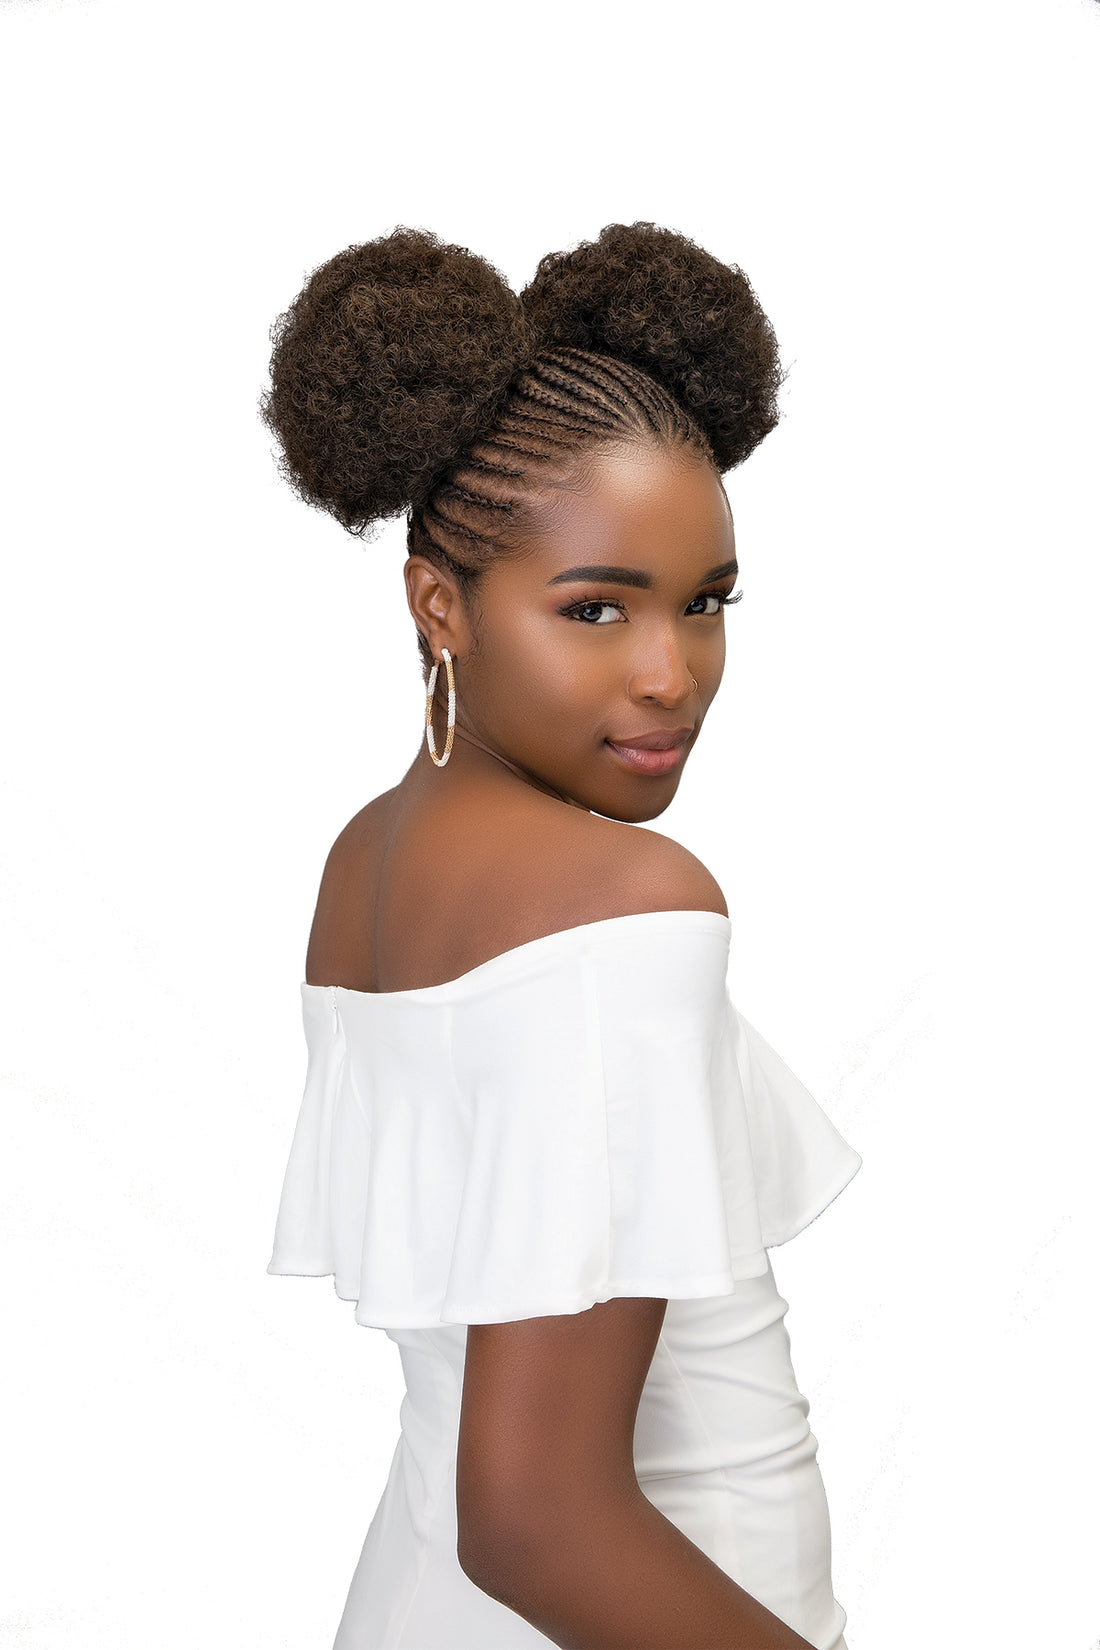 JANET COLLECTION - AFRO PUFF STRING (2PCS)